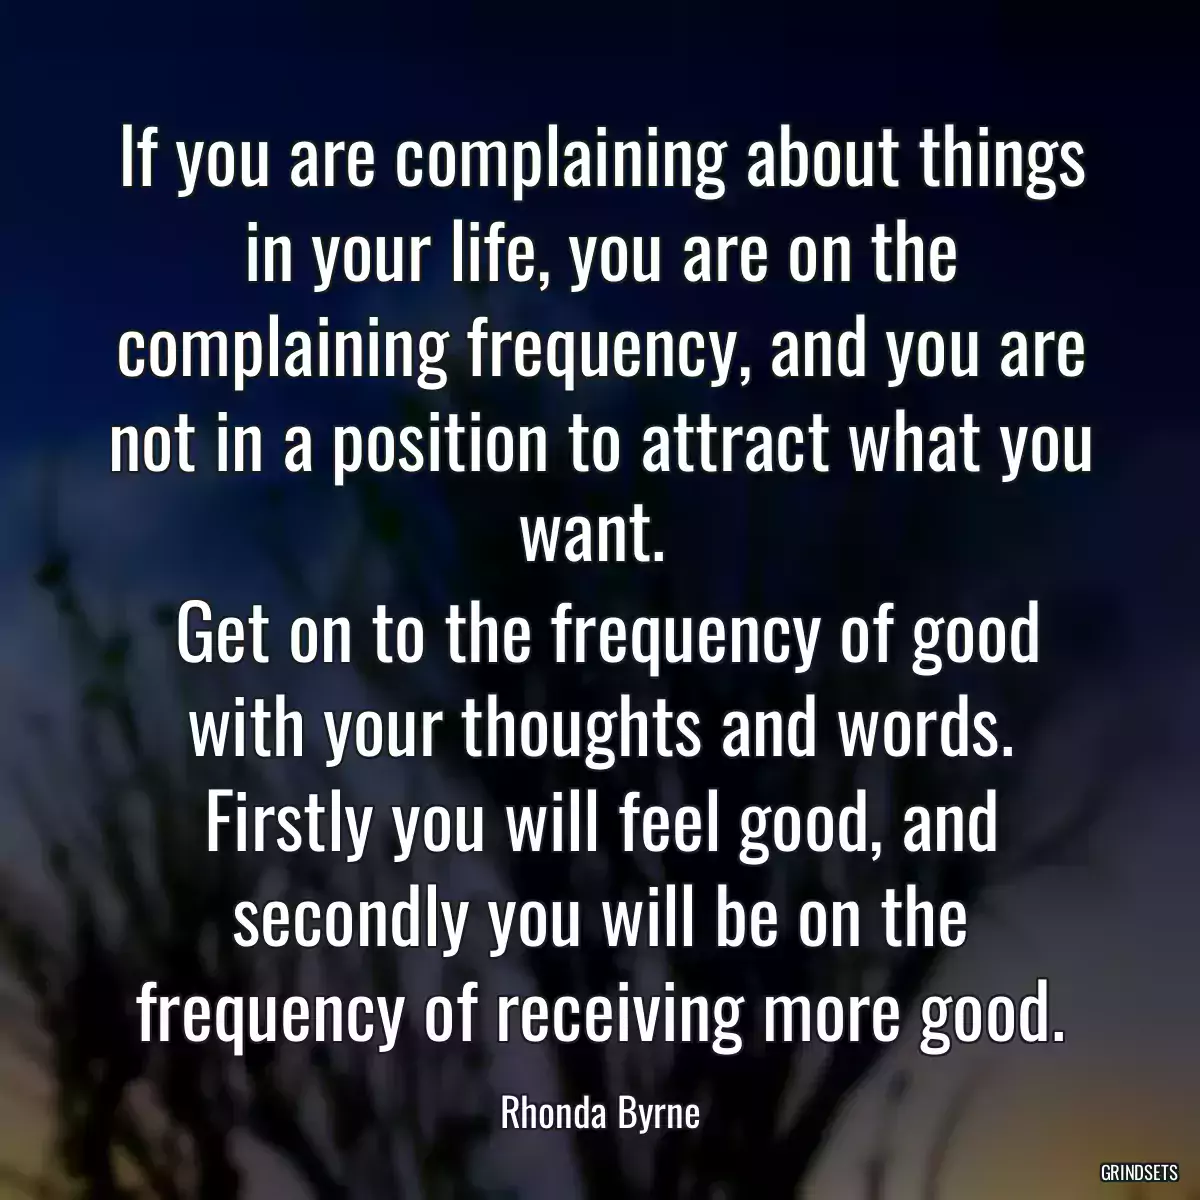 If you are complaining about things in your life, you are on the complaining frequency, and you are not in a position to attract what you want. 
 Get on to the frequency of good with your thoughts and words. Firstly you will feel good, and secondly you will be on the frequency of receiving more good.